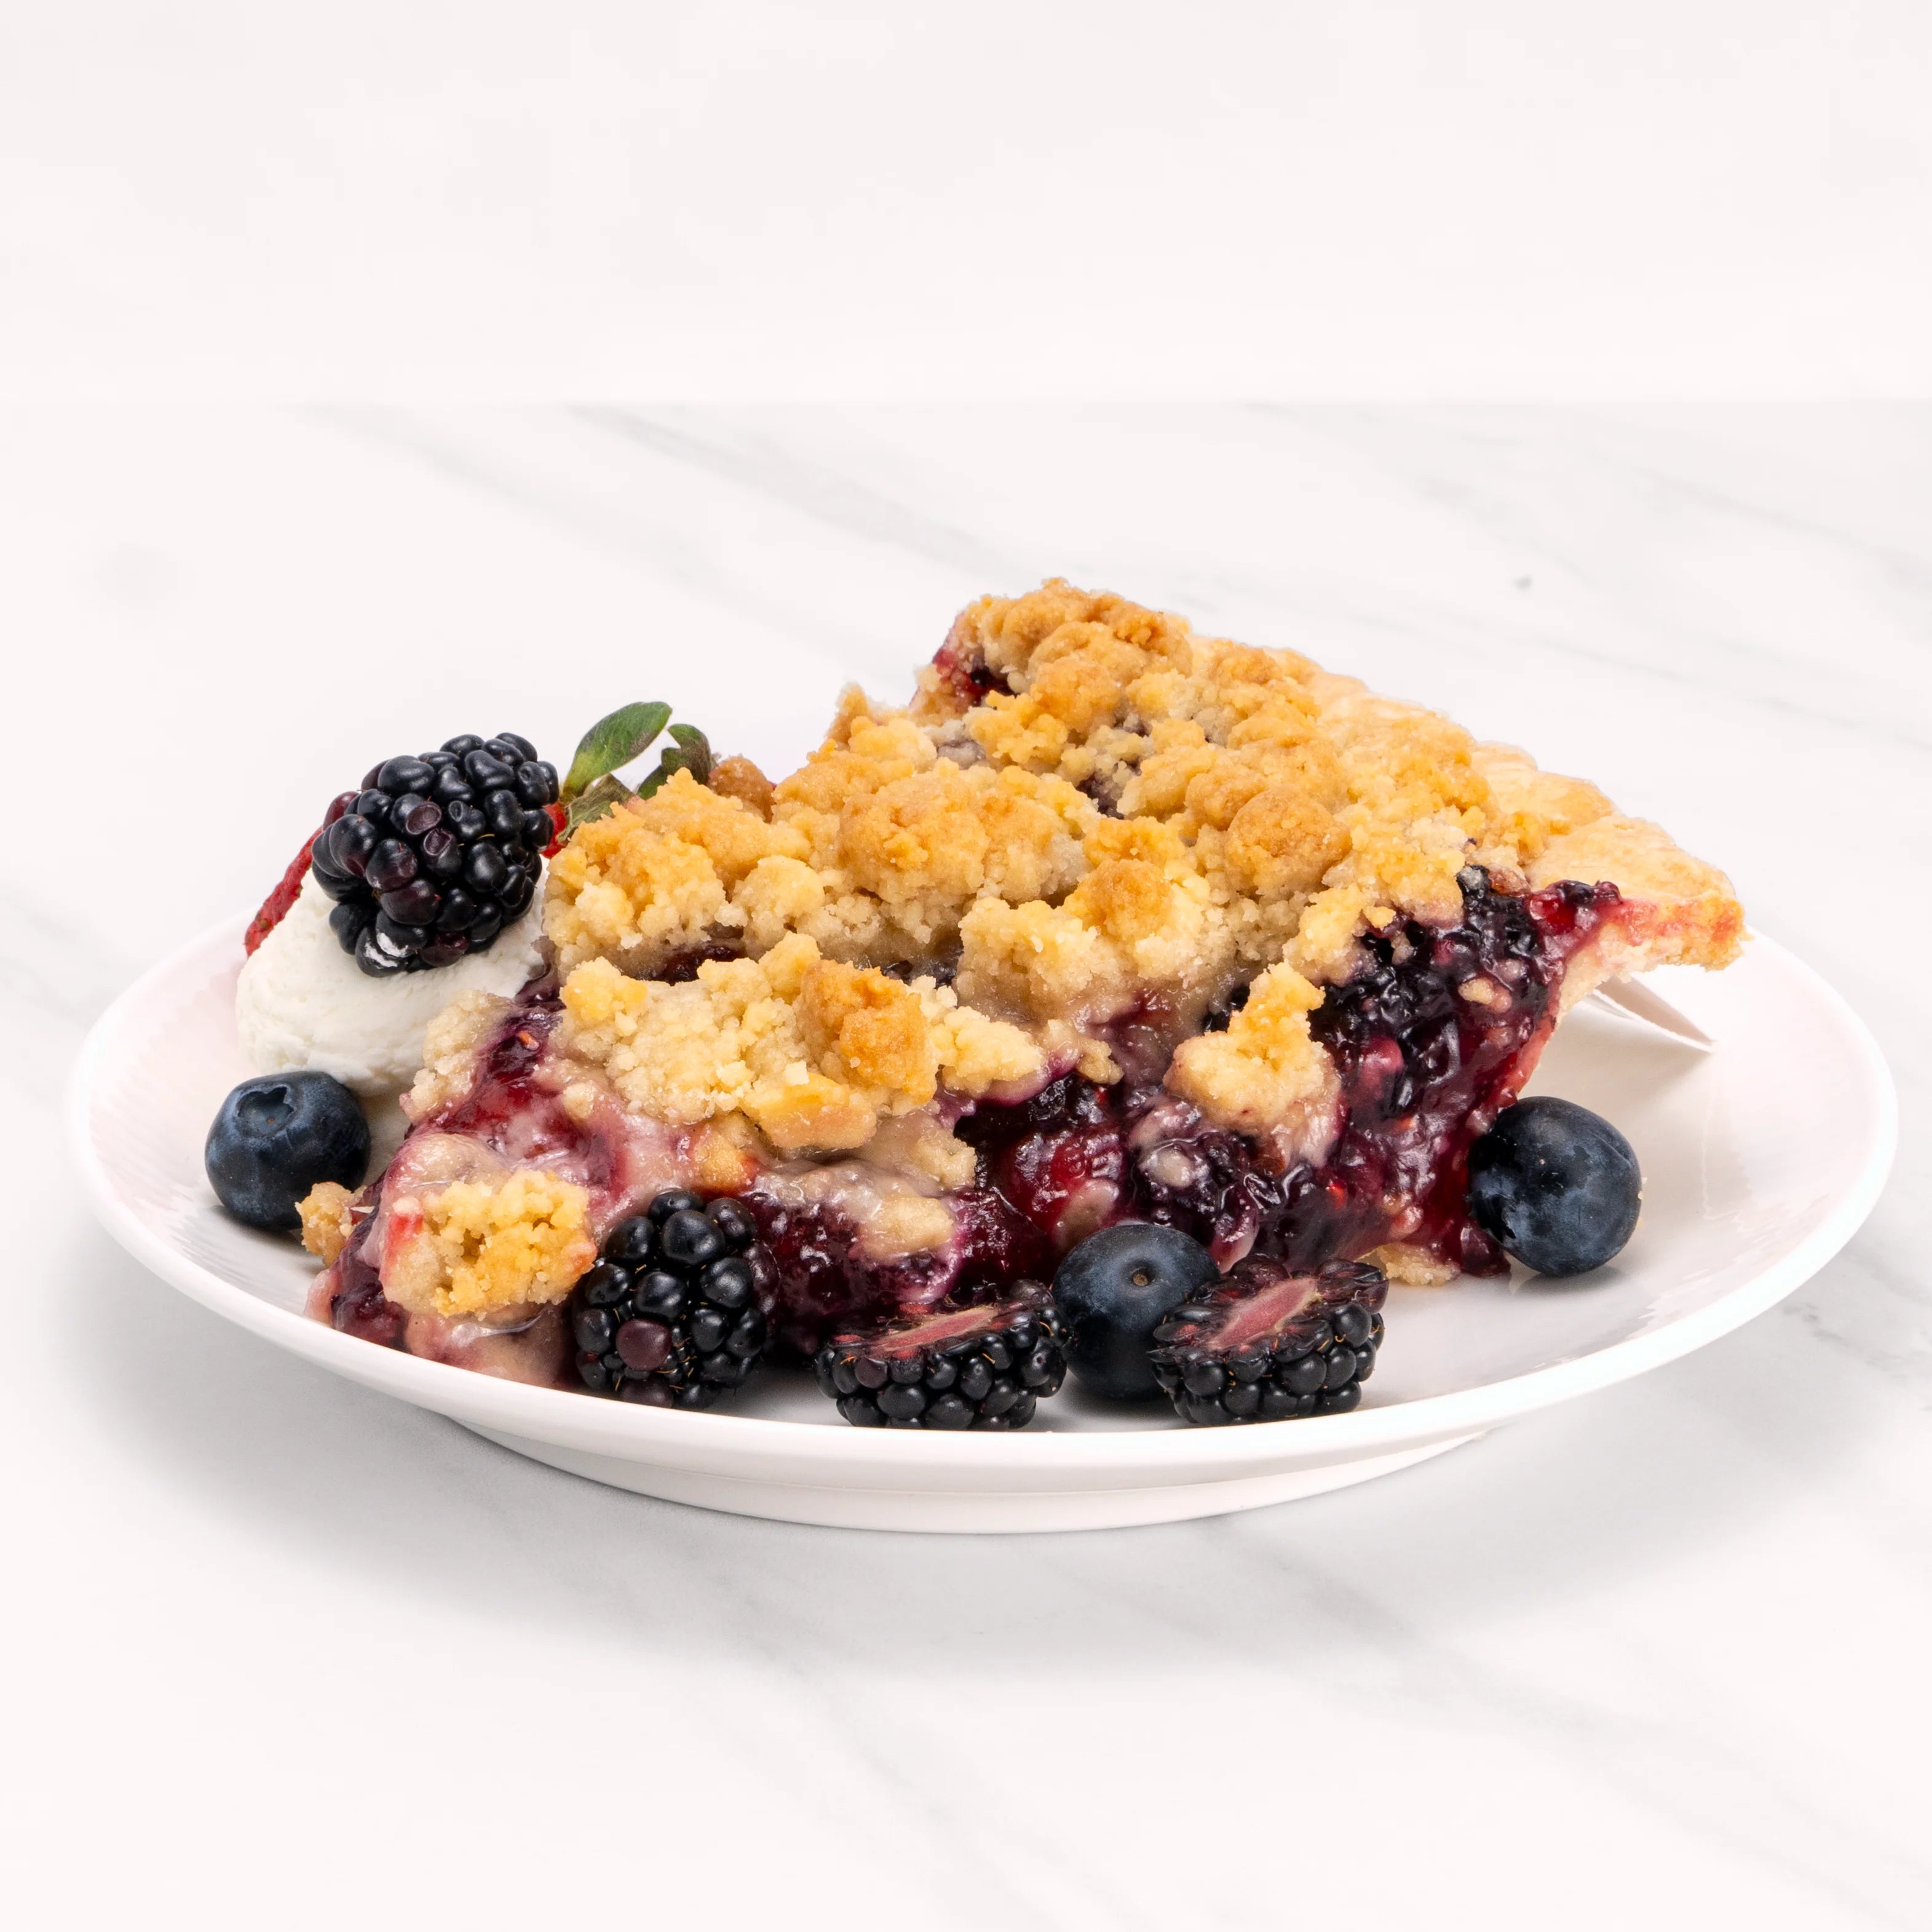 Slice of Triple Berry Pie garnished with blueberries, strawberries, blackberries, and crème.